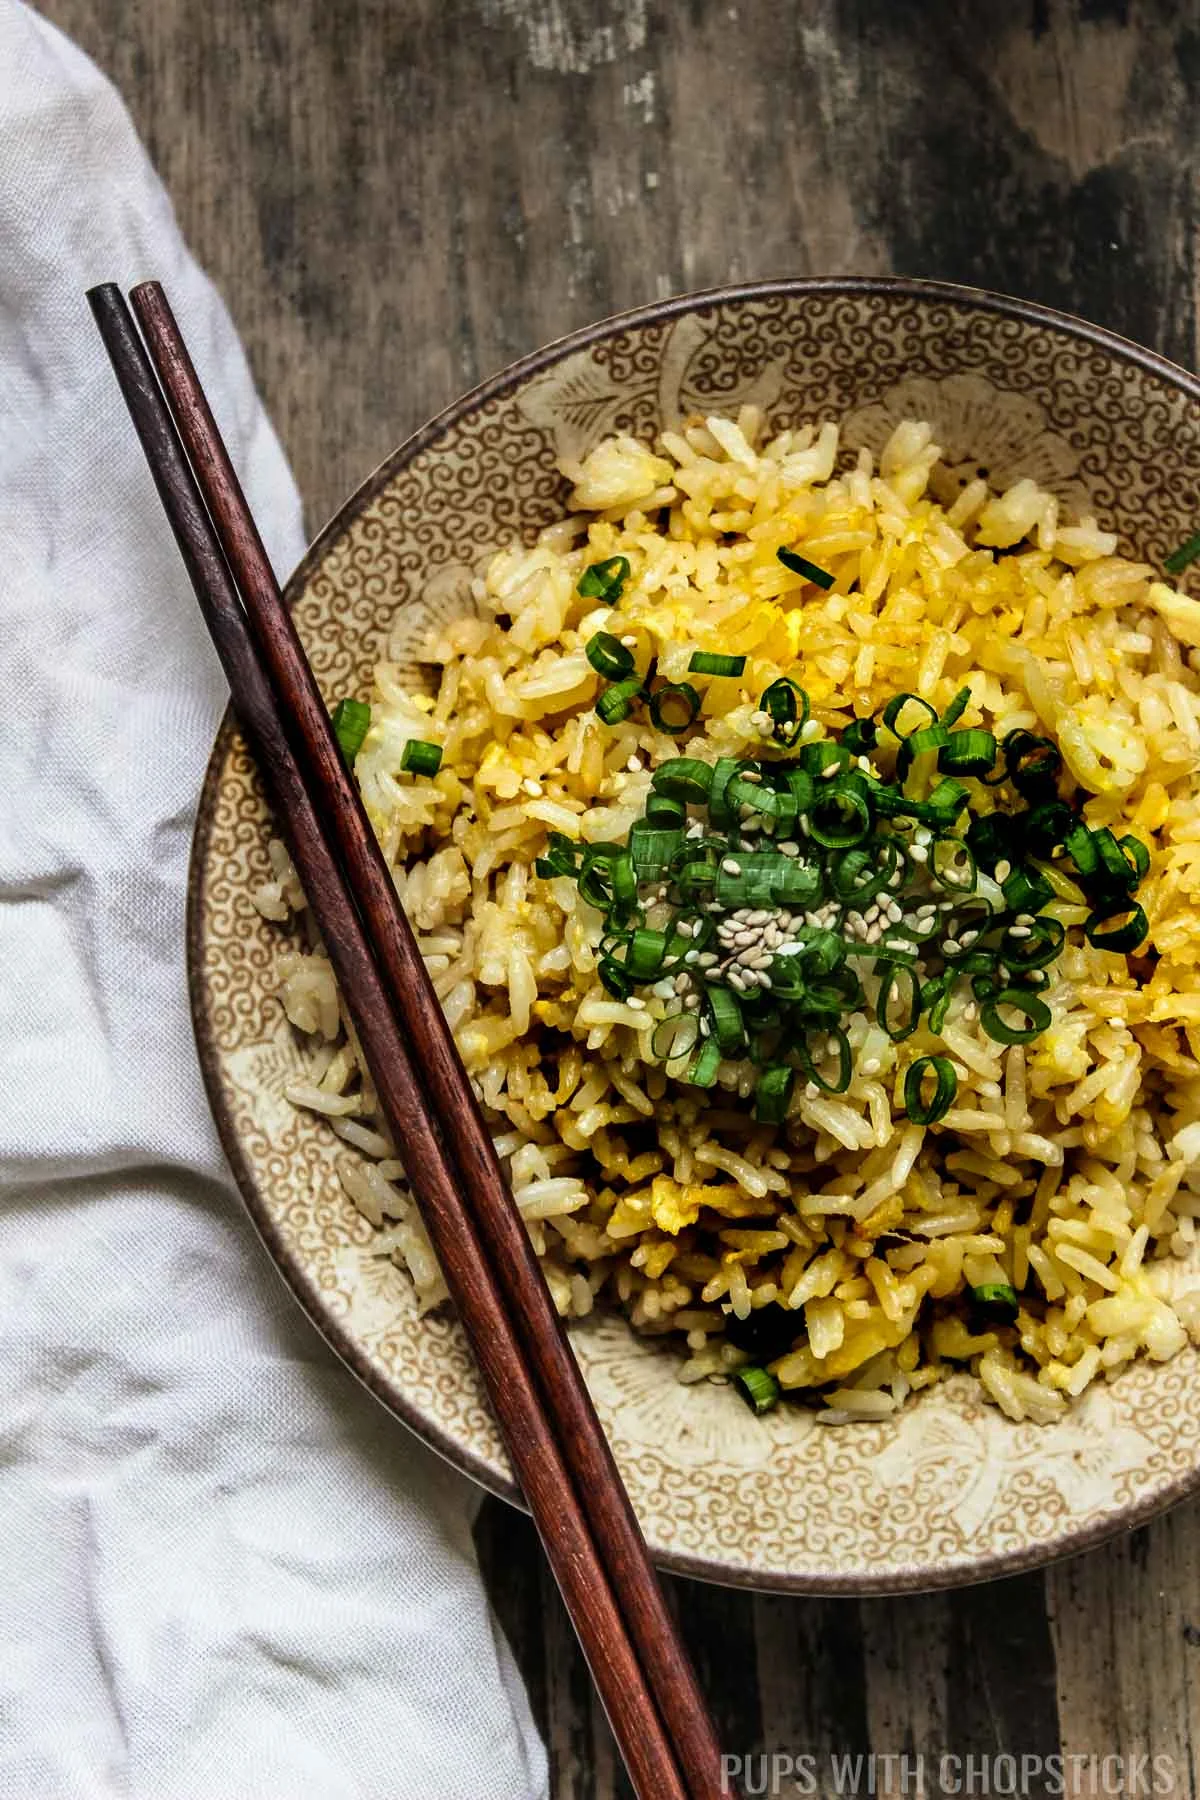 A large bowl of Chinese egg fried rice on a wooden table with a pair of chopsticks and a handkerchief